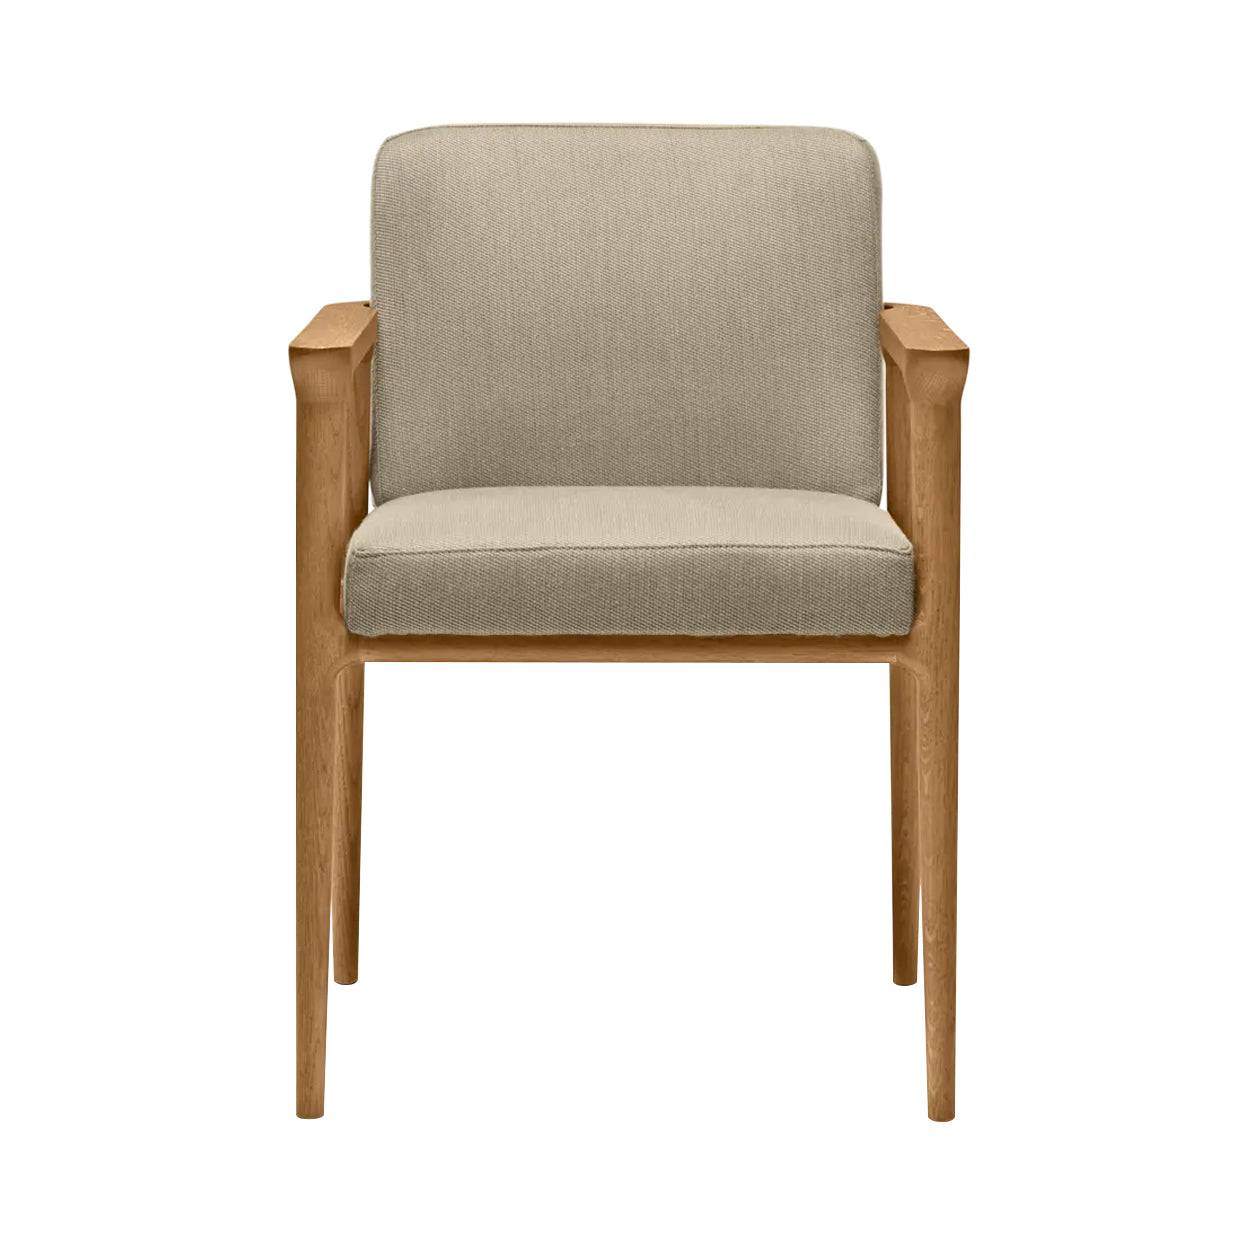 Zio Dining Chair: Natural Oil